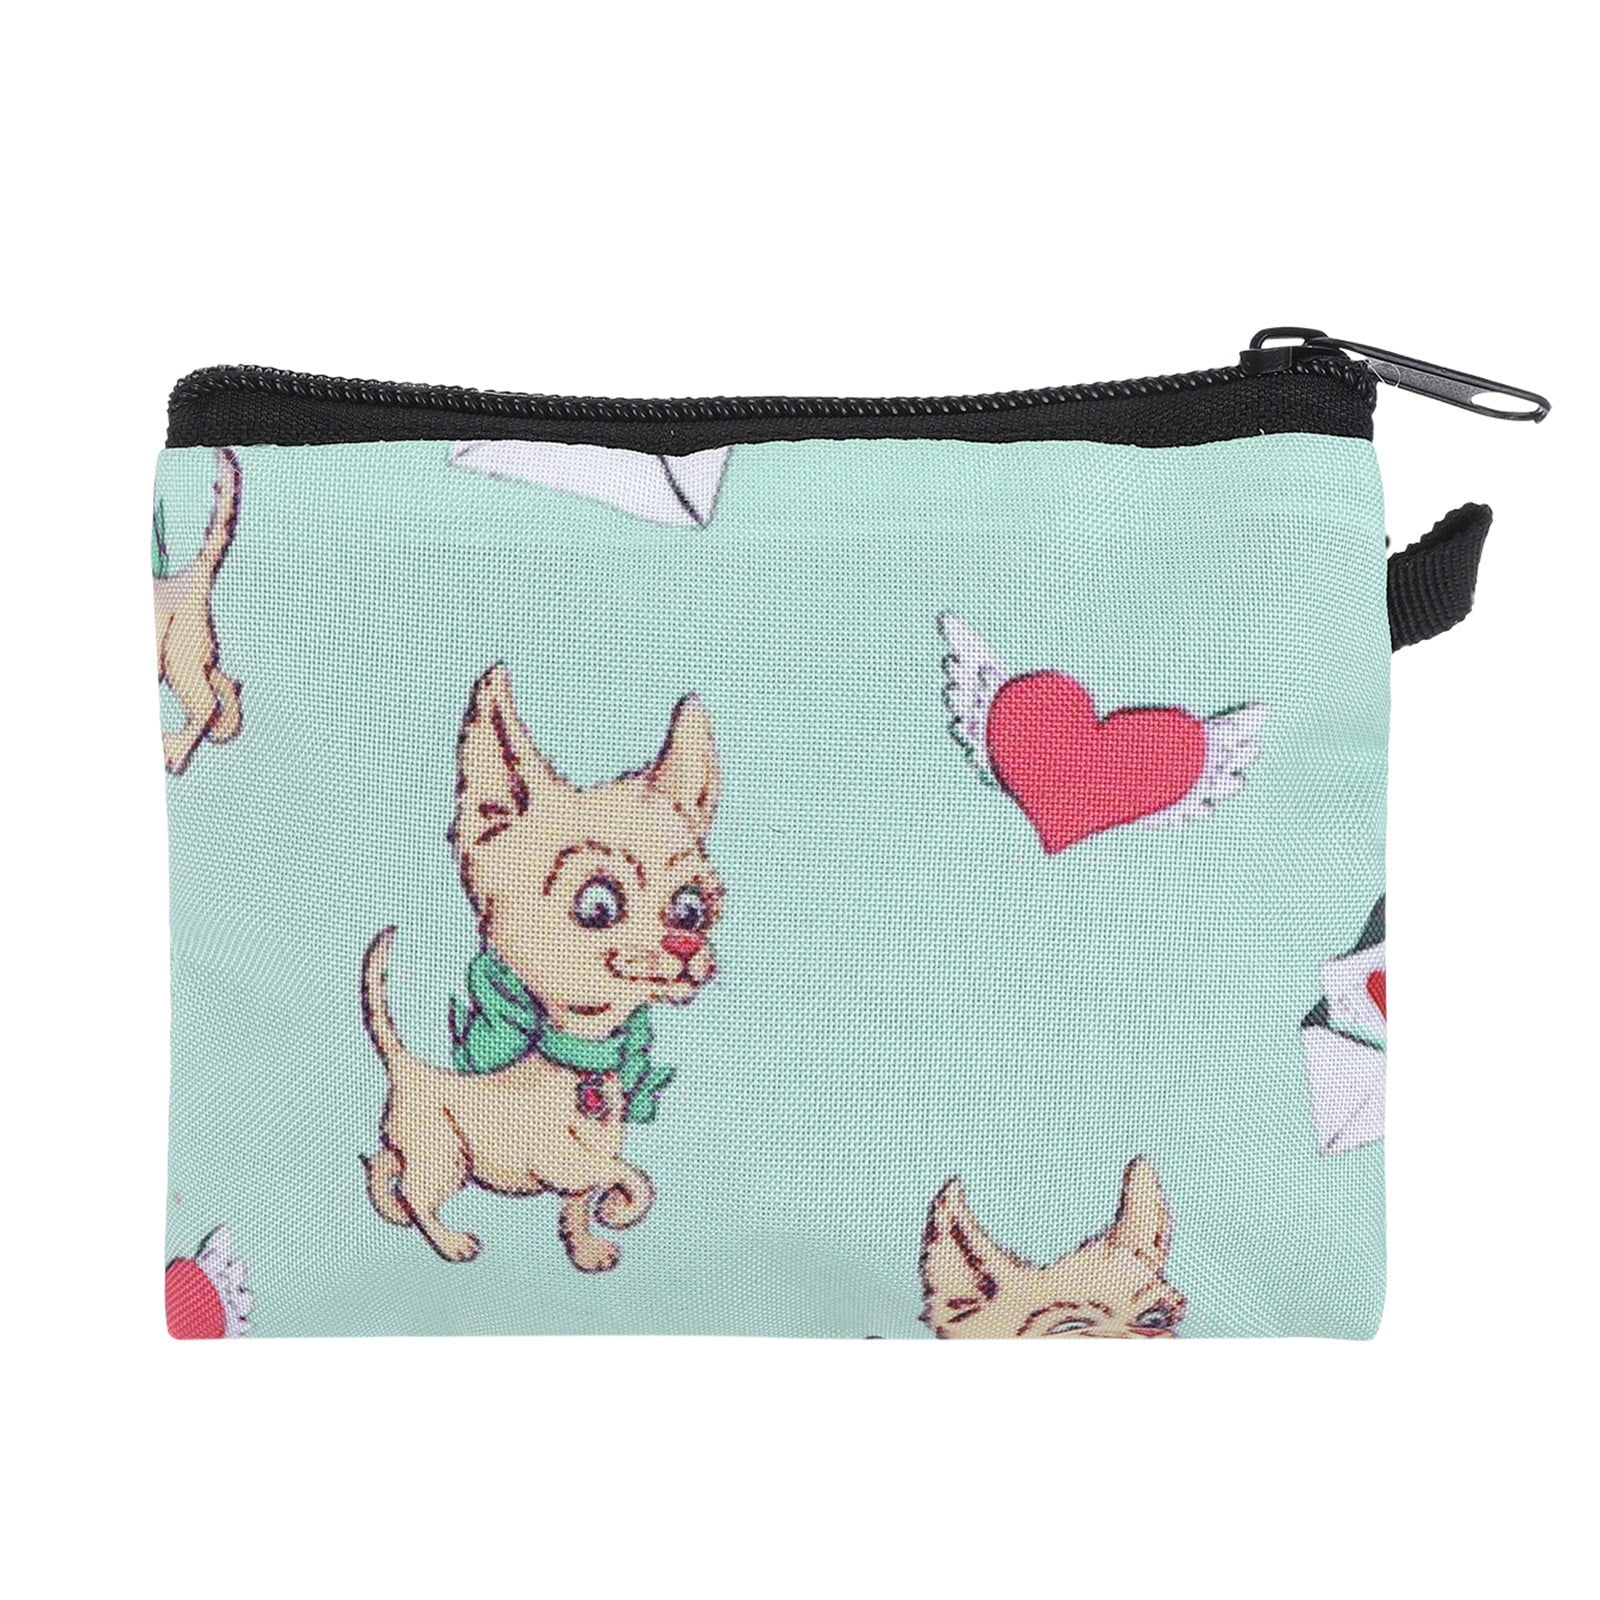 fanny pack for women fabric lanyard wallet for travel Cross body wallet with Corgi dogs vegan belt bag or small waist bag and phone pouch